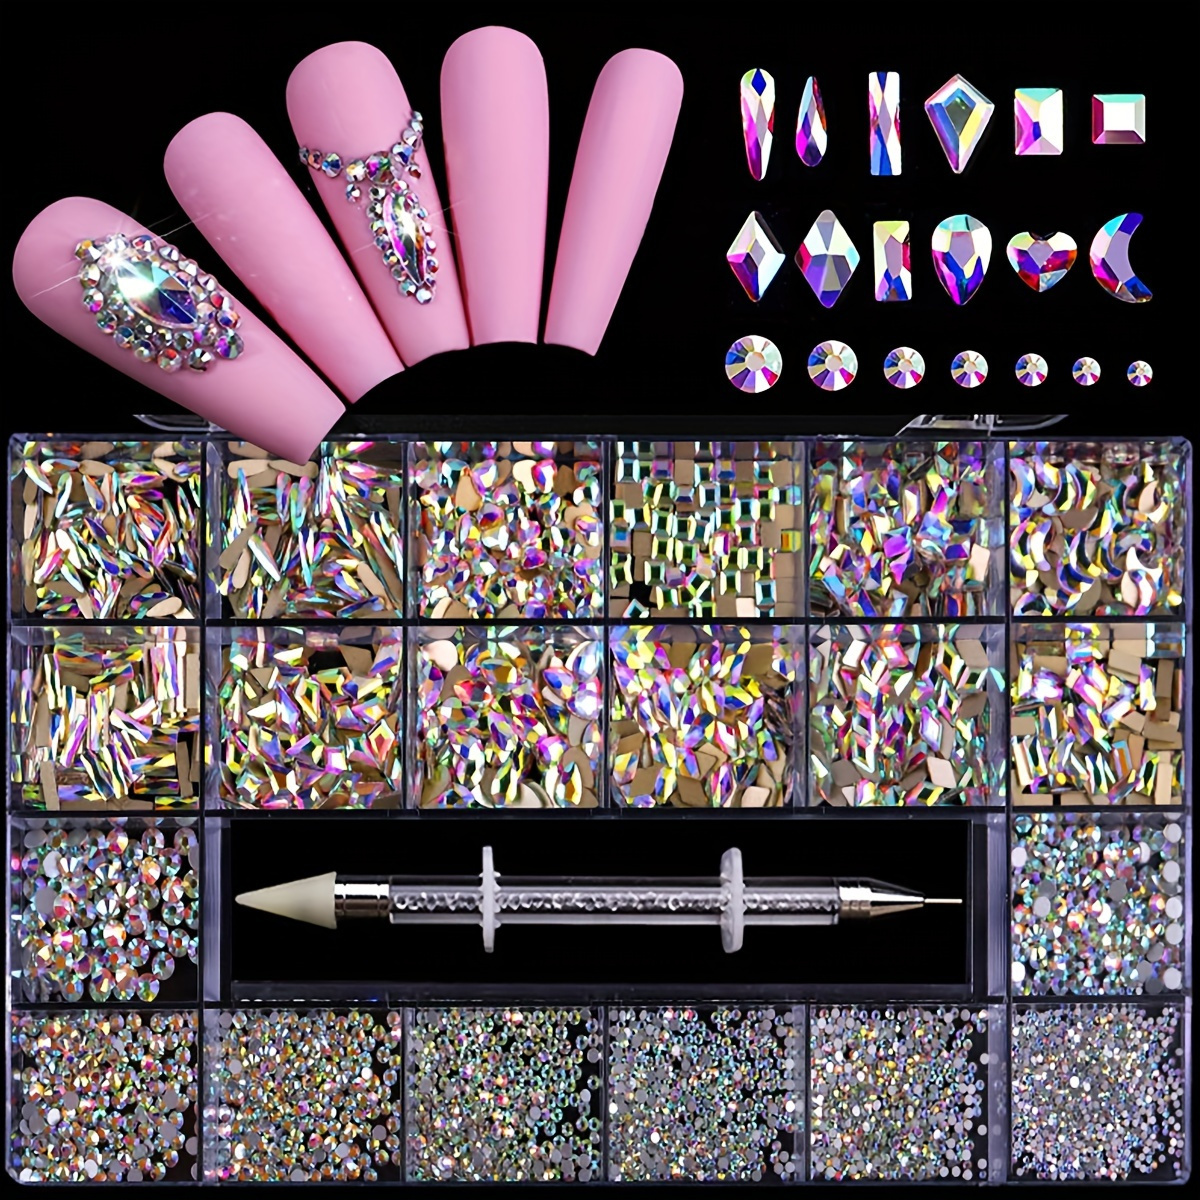 

21 Grid Flatback Glass Nail Art Rhinestone Set With Dotting Pen+rhinestones Bead And Multi-shape Crystal Nail Art Gemstones For Making Accessories Shoes, Clothes, Makeup, Bags, Nail Art Decoration